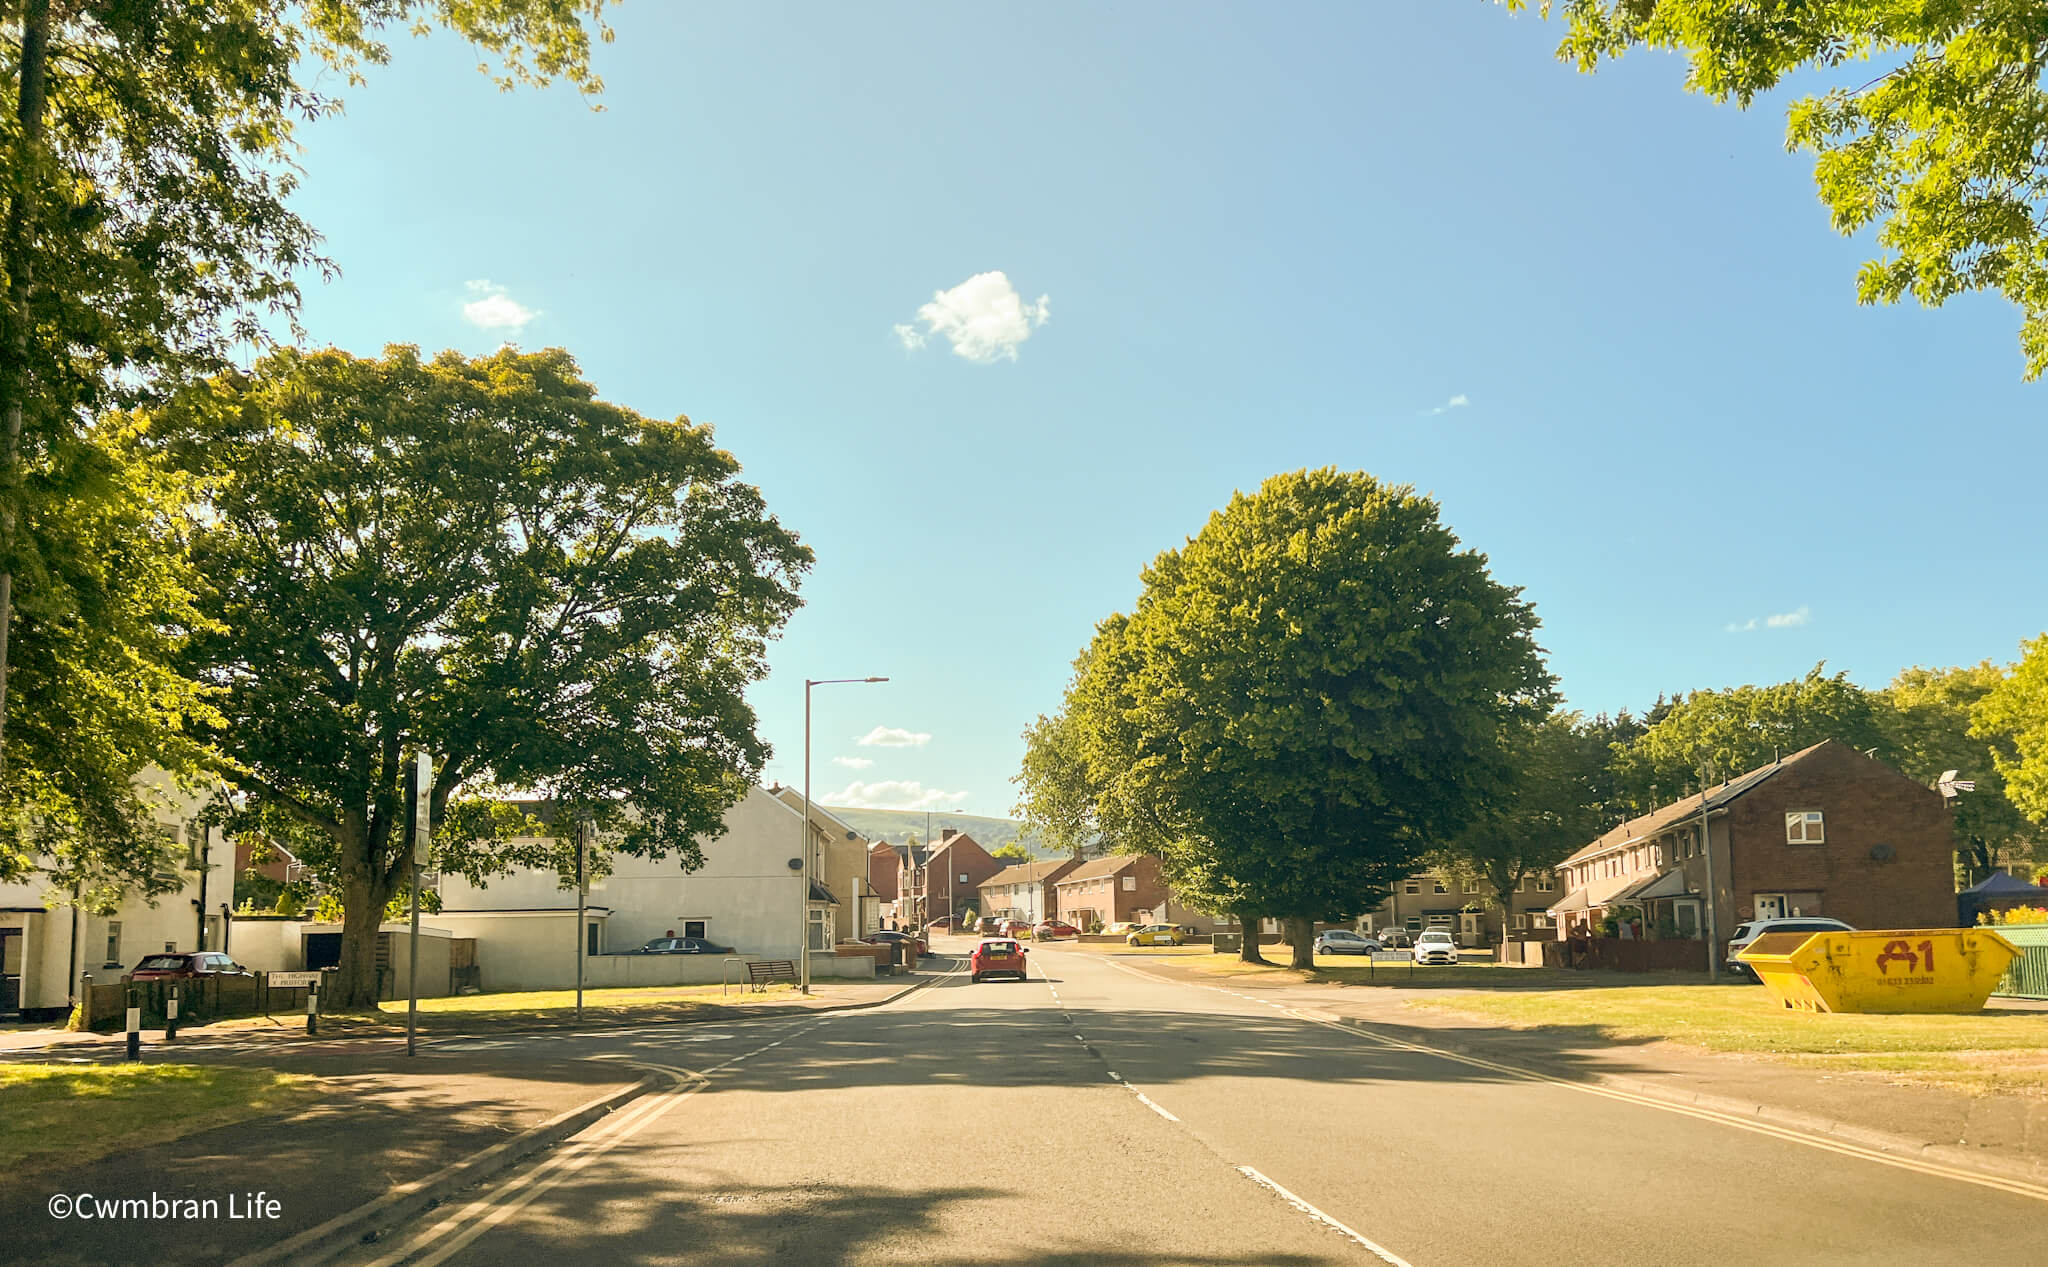 Oakfield Road in Cwmbran. A street with several trees along it